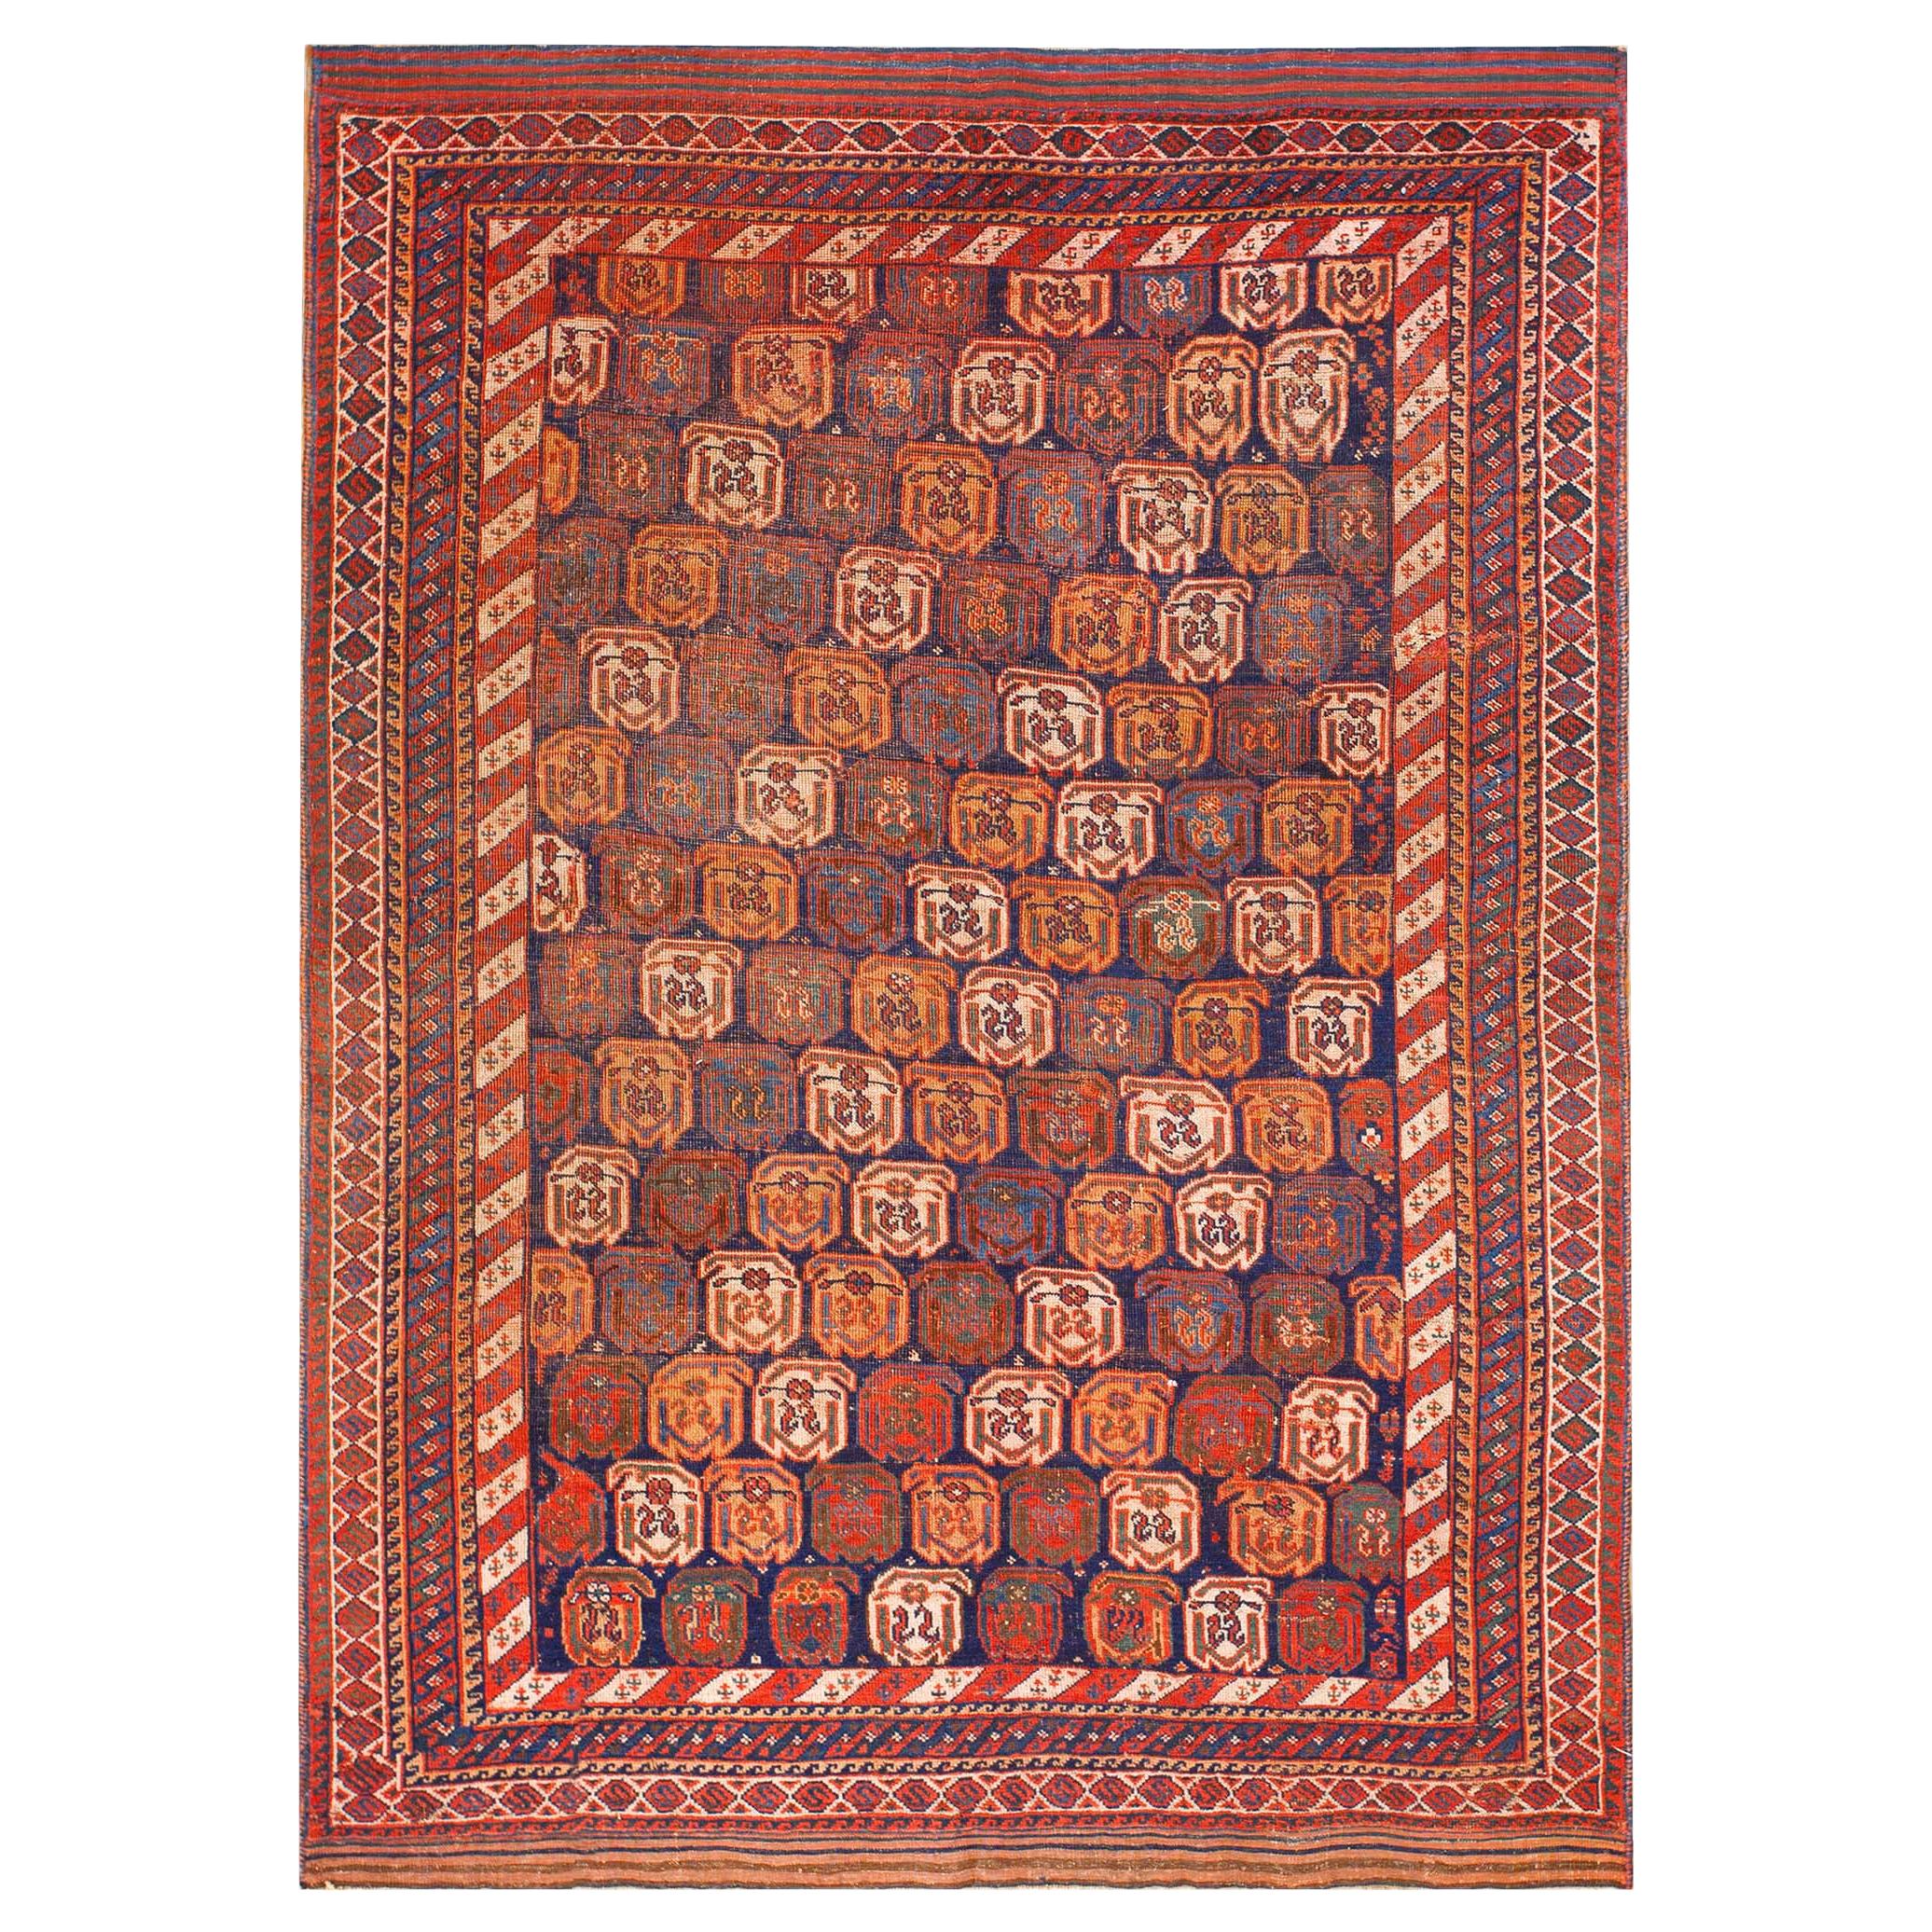 Late 19th Century SE. Persian Afshar Carpet ( 4'6" x 6'3" - 137 x 191 ) For Sale